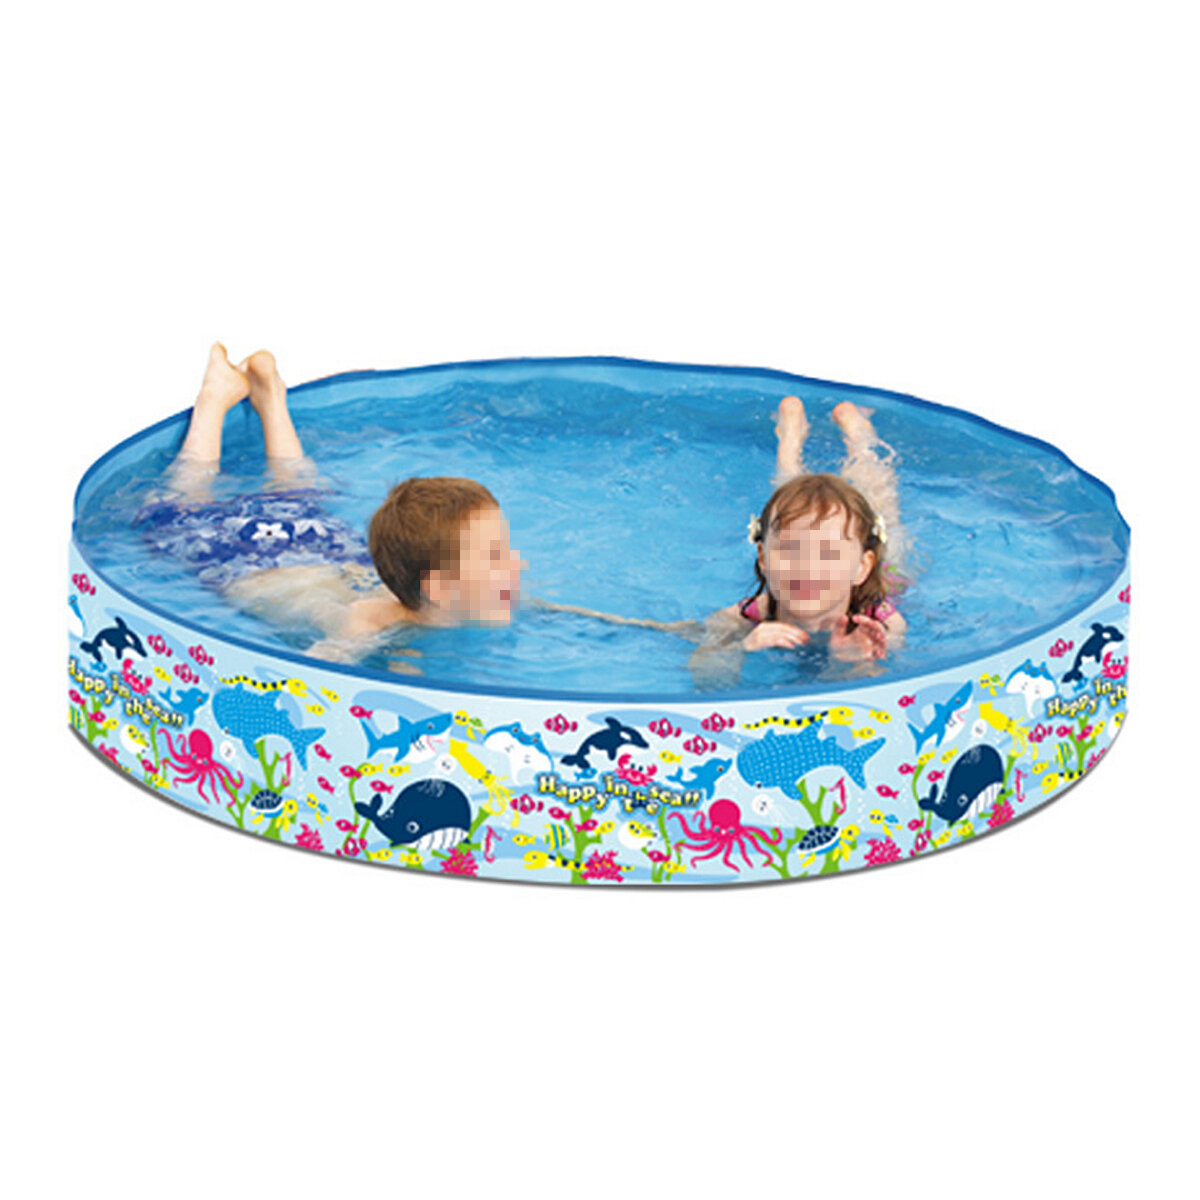 120/150cm Inflatable Swimming Pool Family Outdoor Garden Kid Play Bathtub